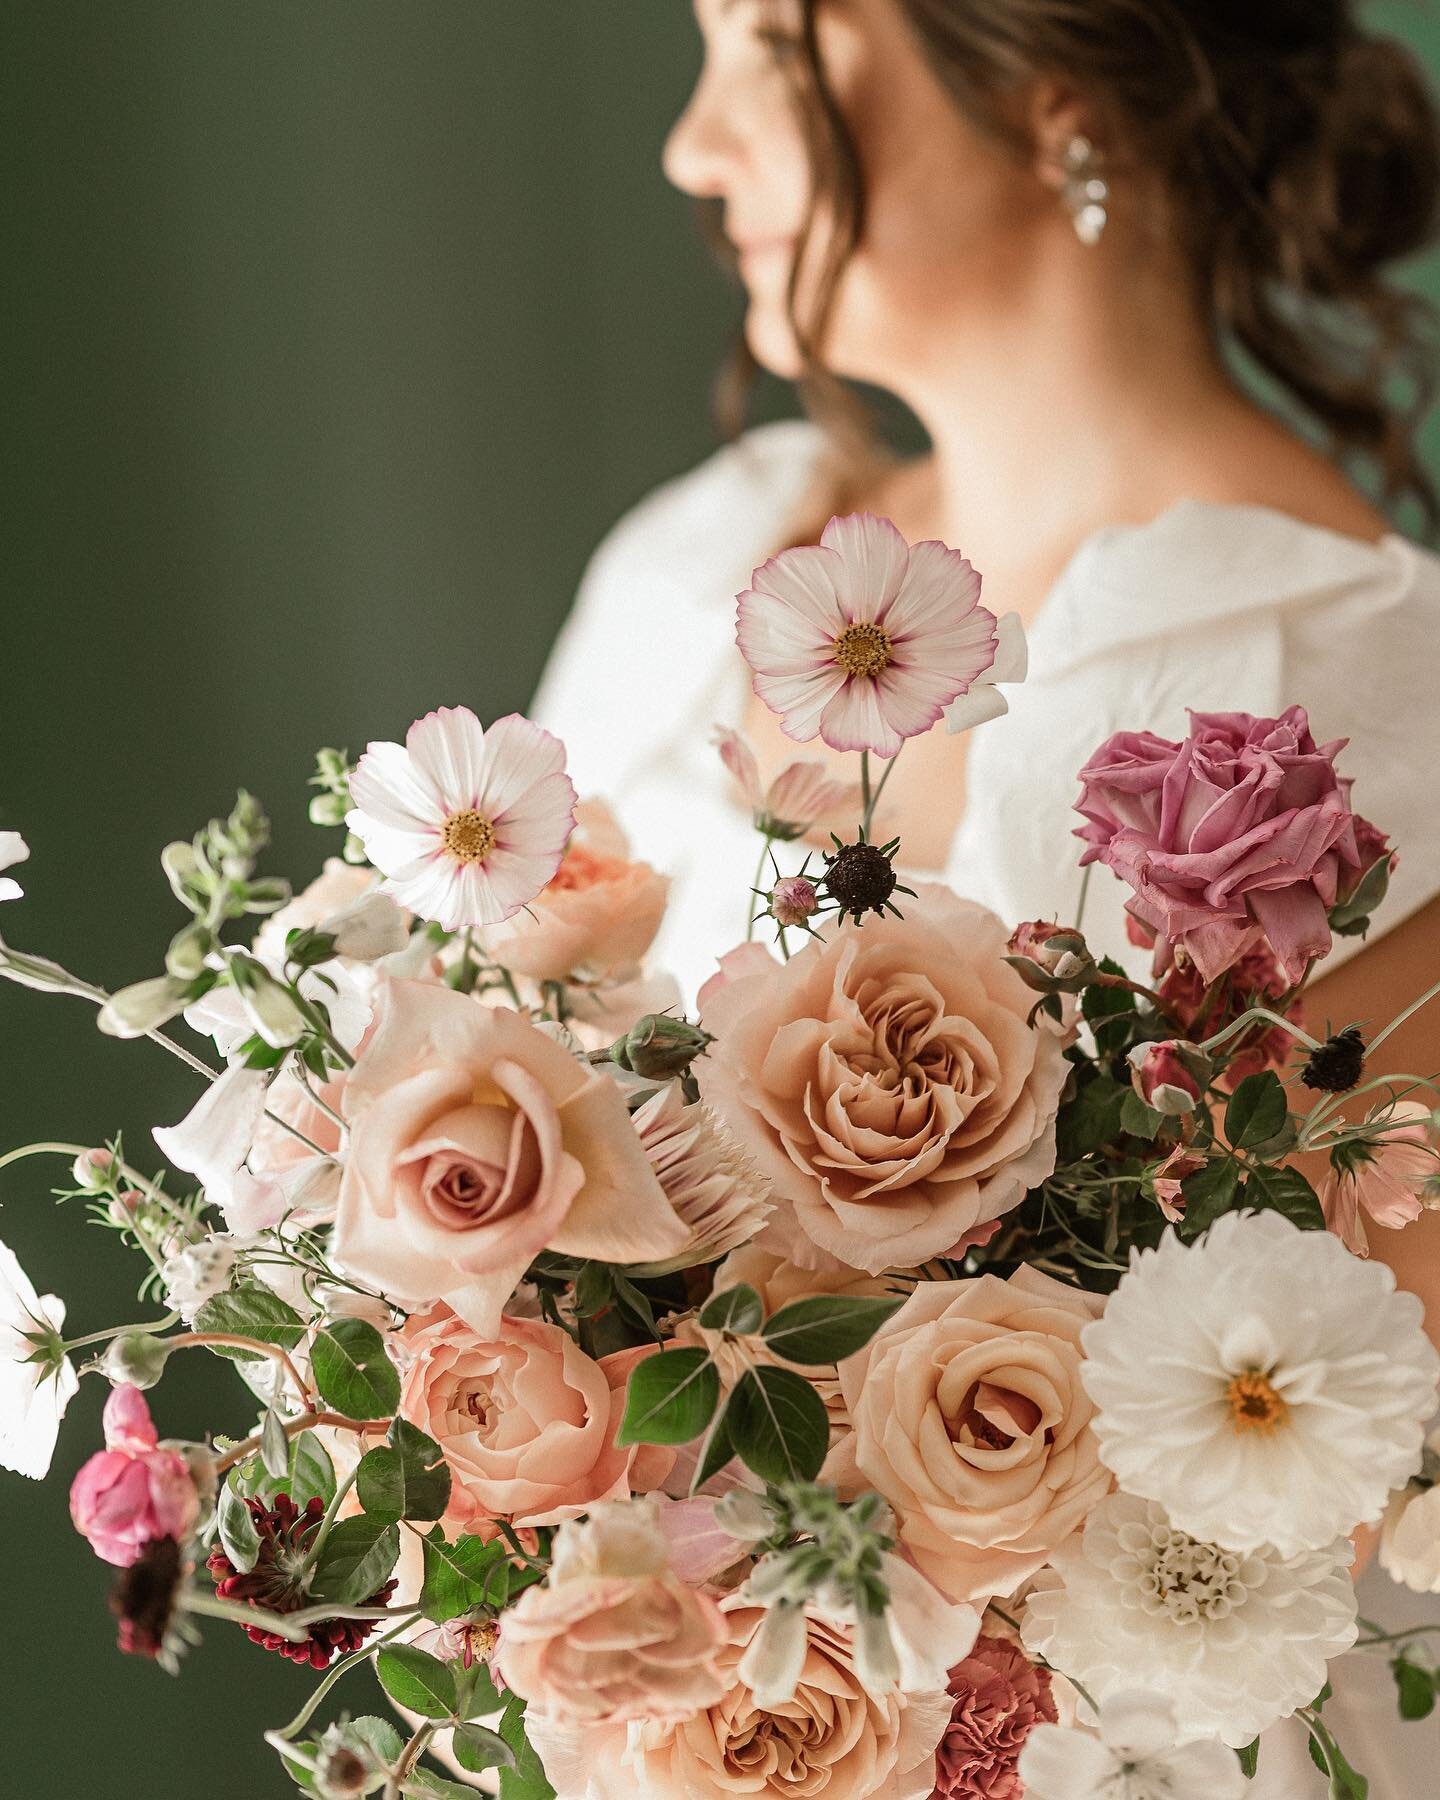 Anais &amp; Eben&rsquo;s romantic wedding was pure perfection! 🍃 Their day was filled with personal details and loads of fun, just like her beautiful bouquet. It featured gorgeous garden roses, whimsical cosmos, and loads more seasonal florals.

Don